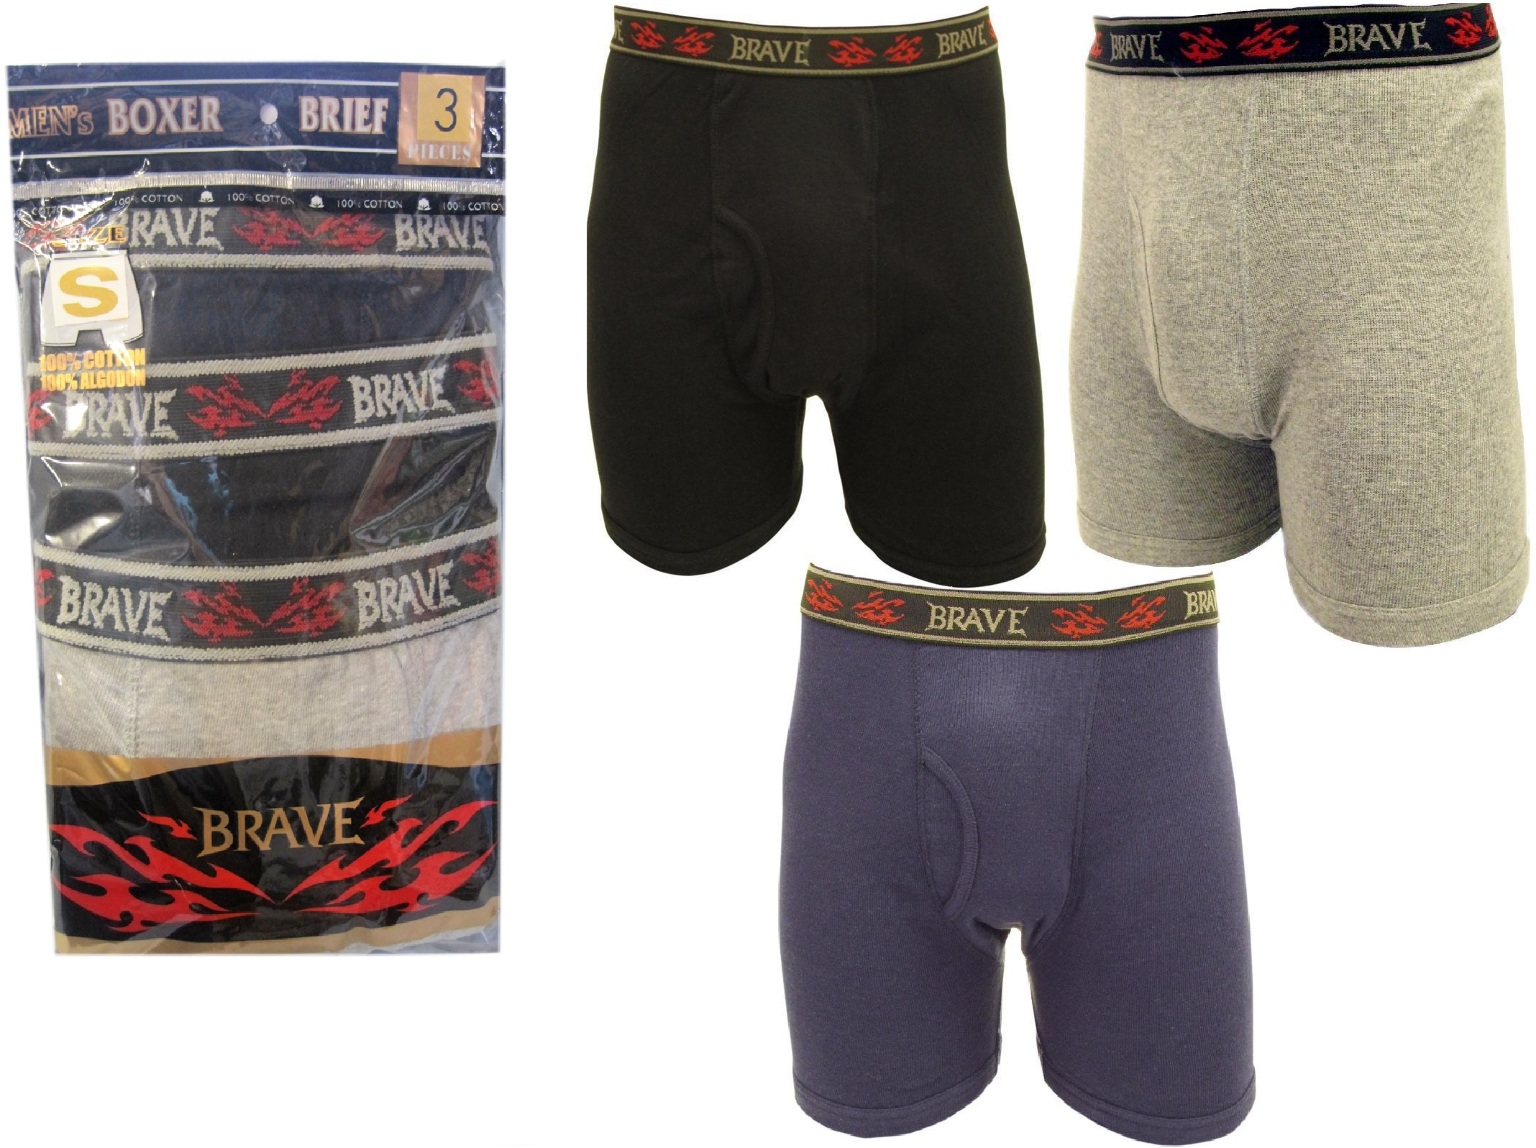 MEN Boxers- DH(Denver Hayes)- stock Offerings at discount price sale -  United Arab Emirates, New - The wholesale platform